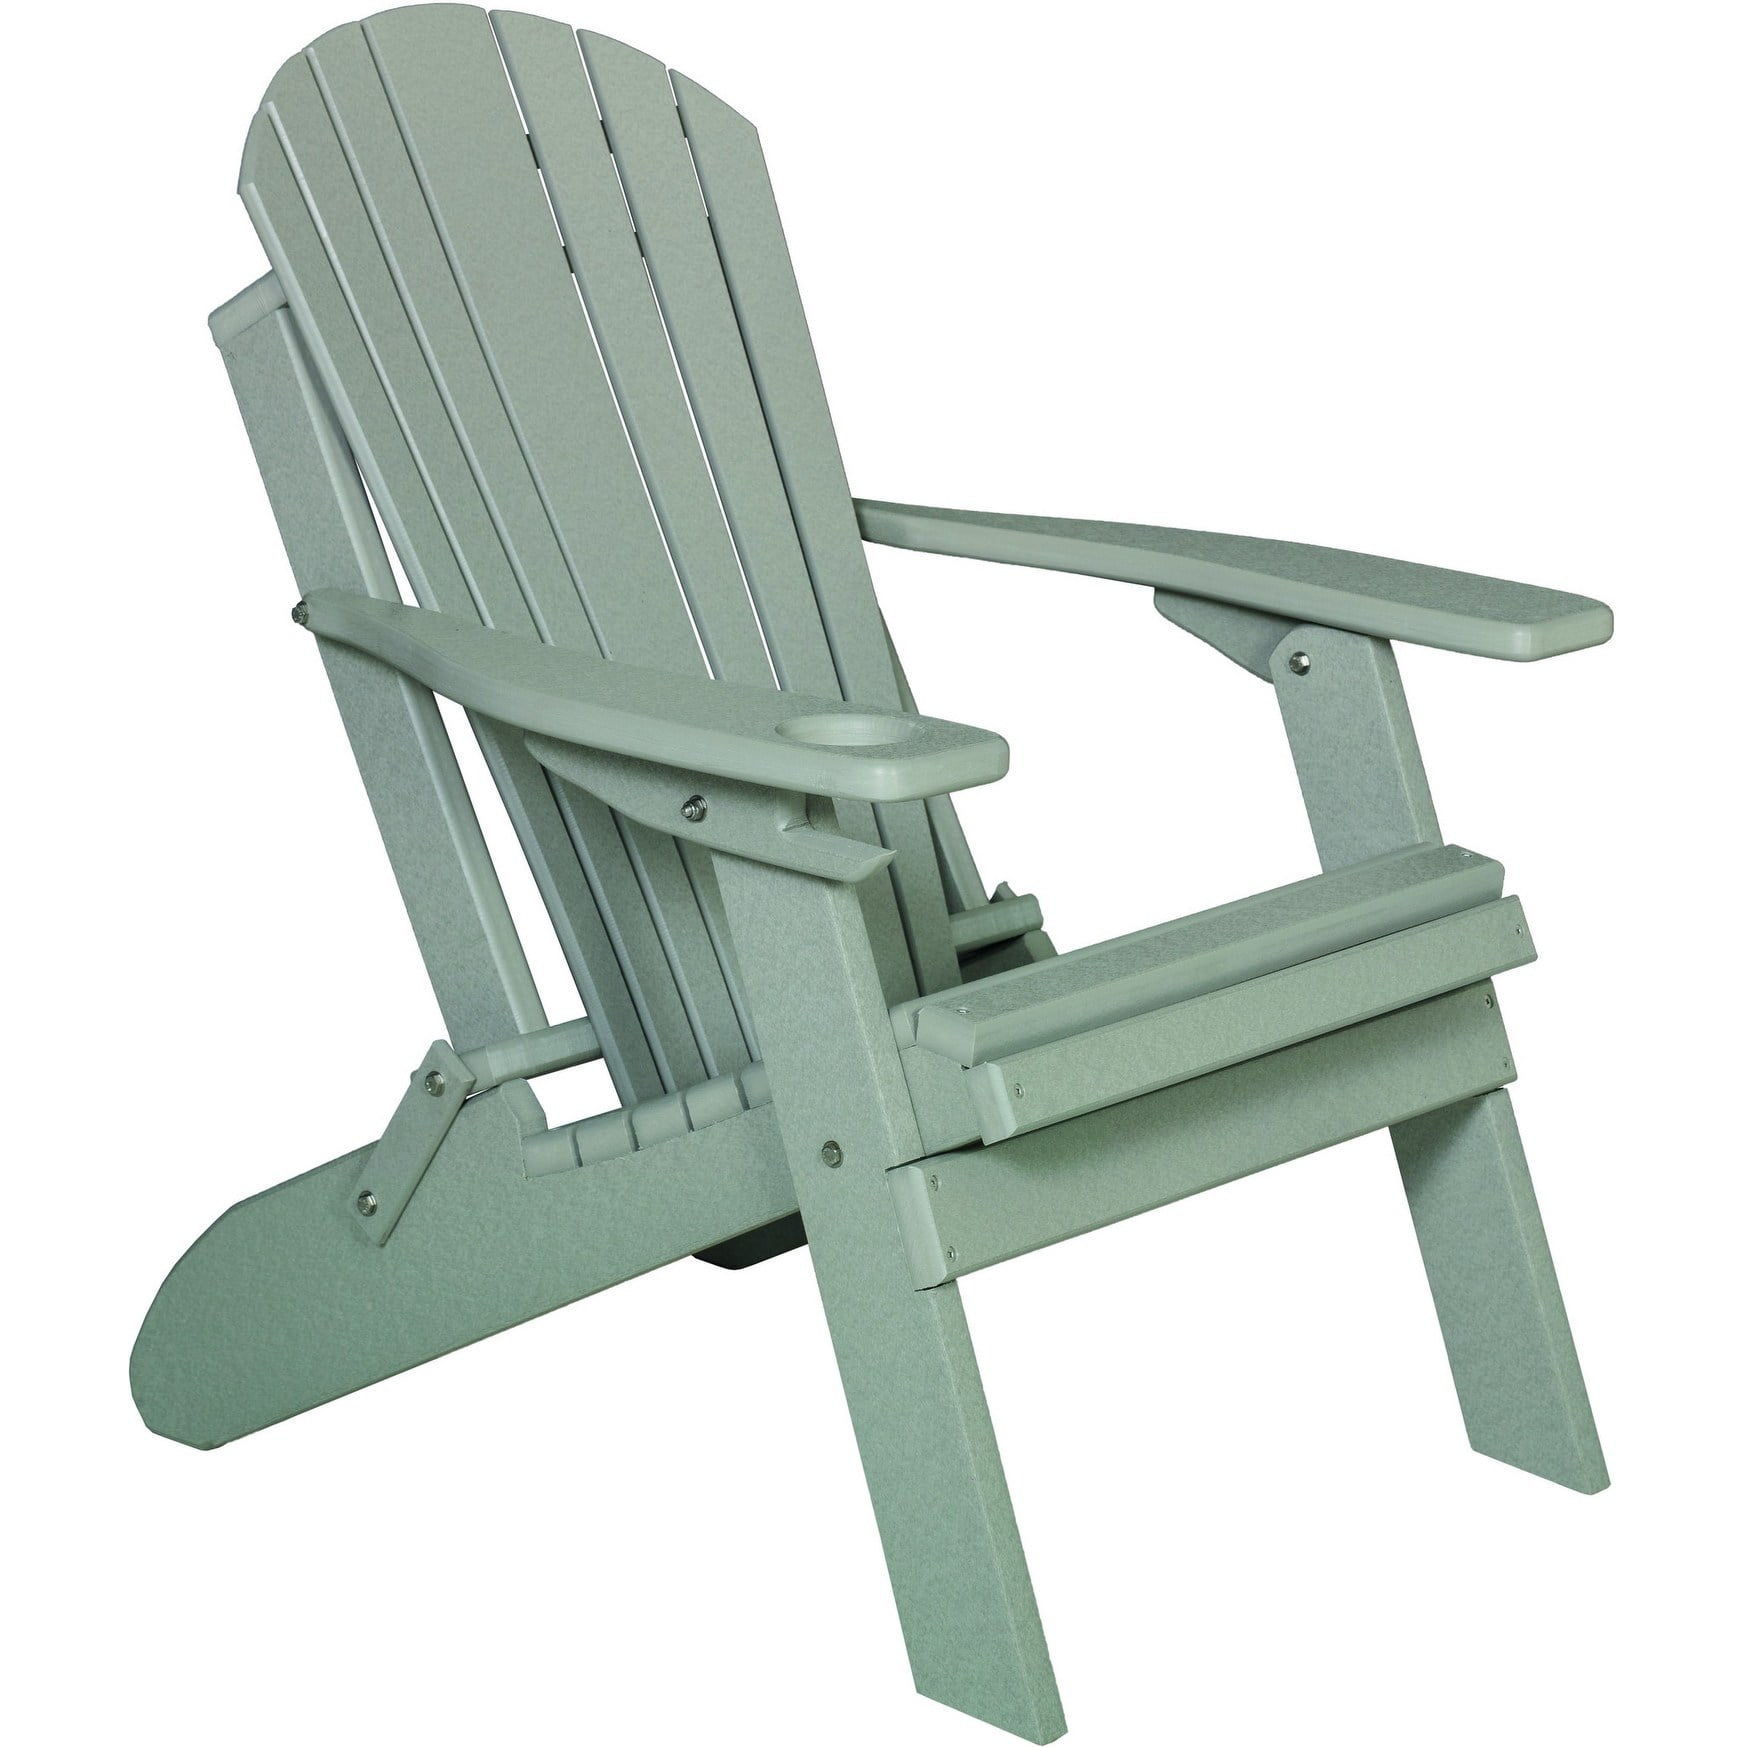 Deluxe Premium Poly Lumber Folding Adirondack Chair w/ Cup Holder 